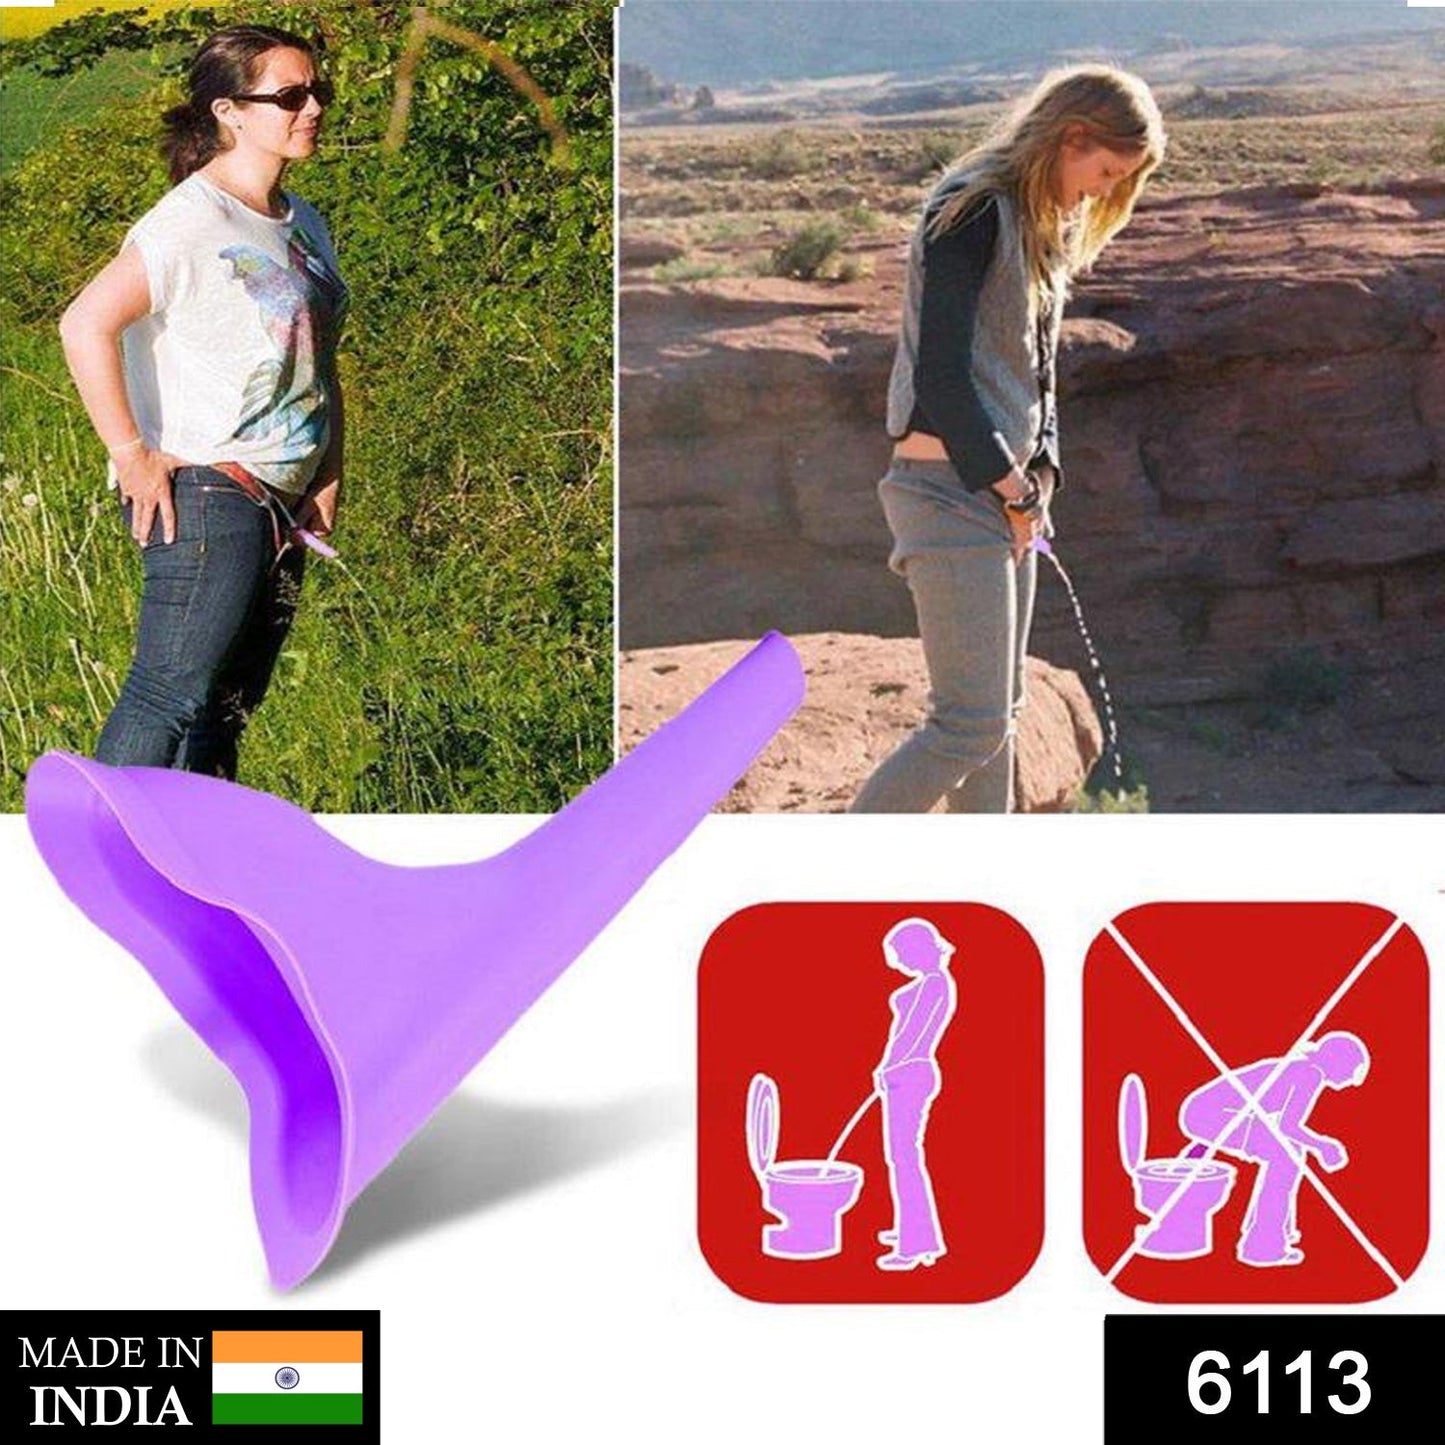 6113 Portable Stand Pee Used for peeing for women both of us, during emergencies and requirements. 